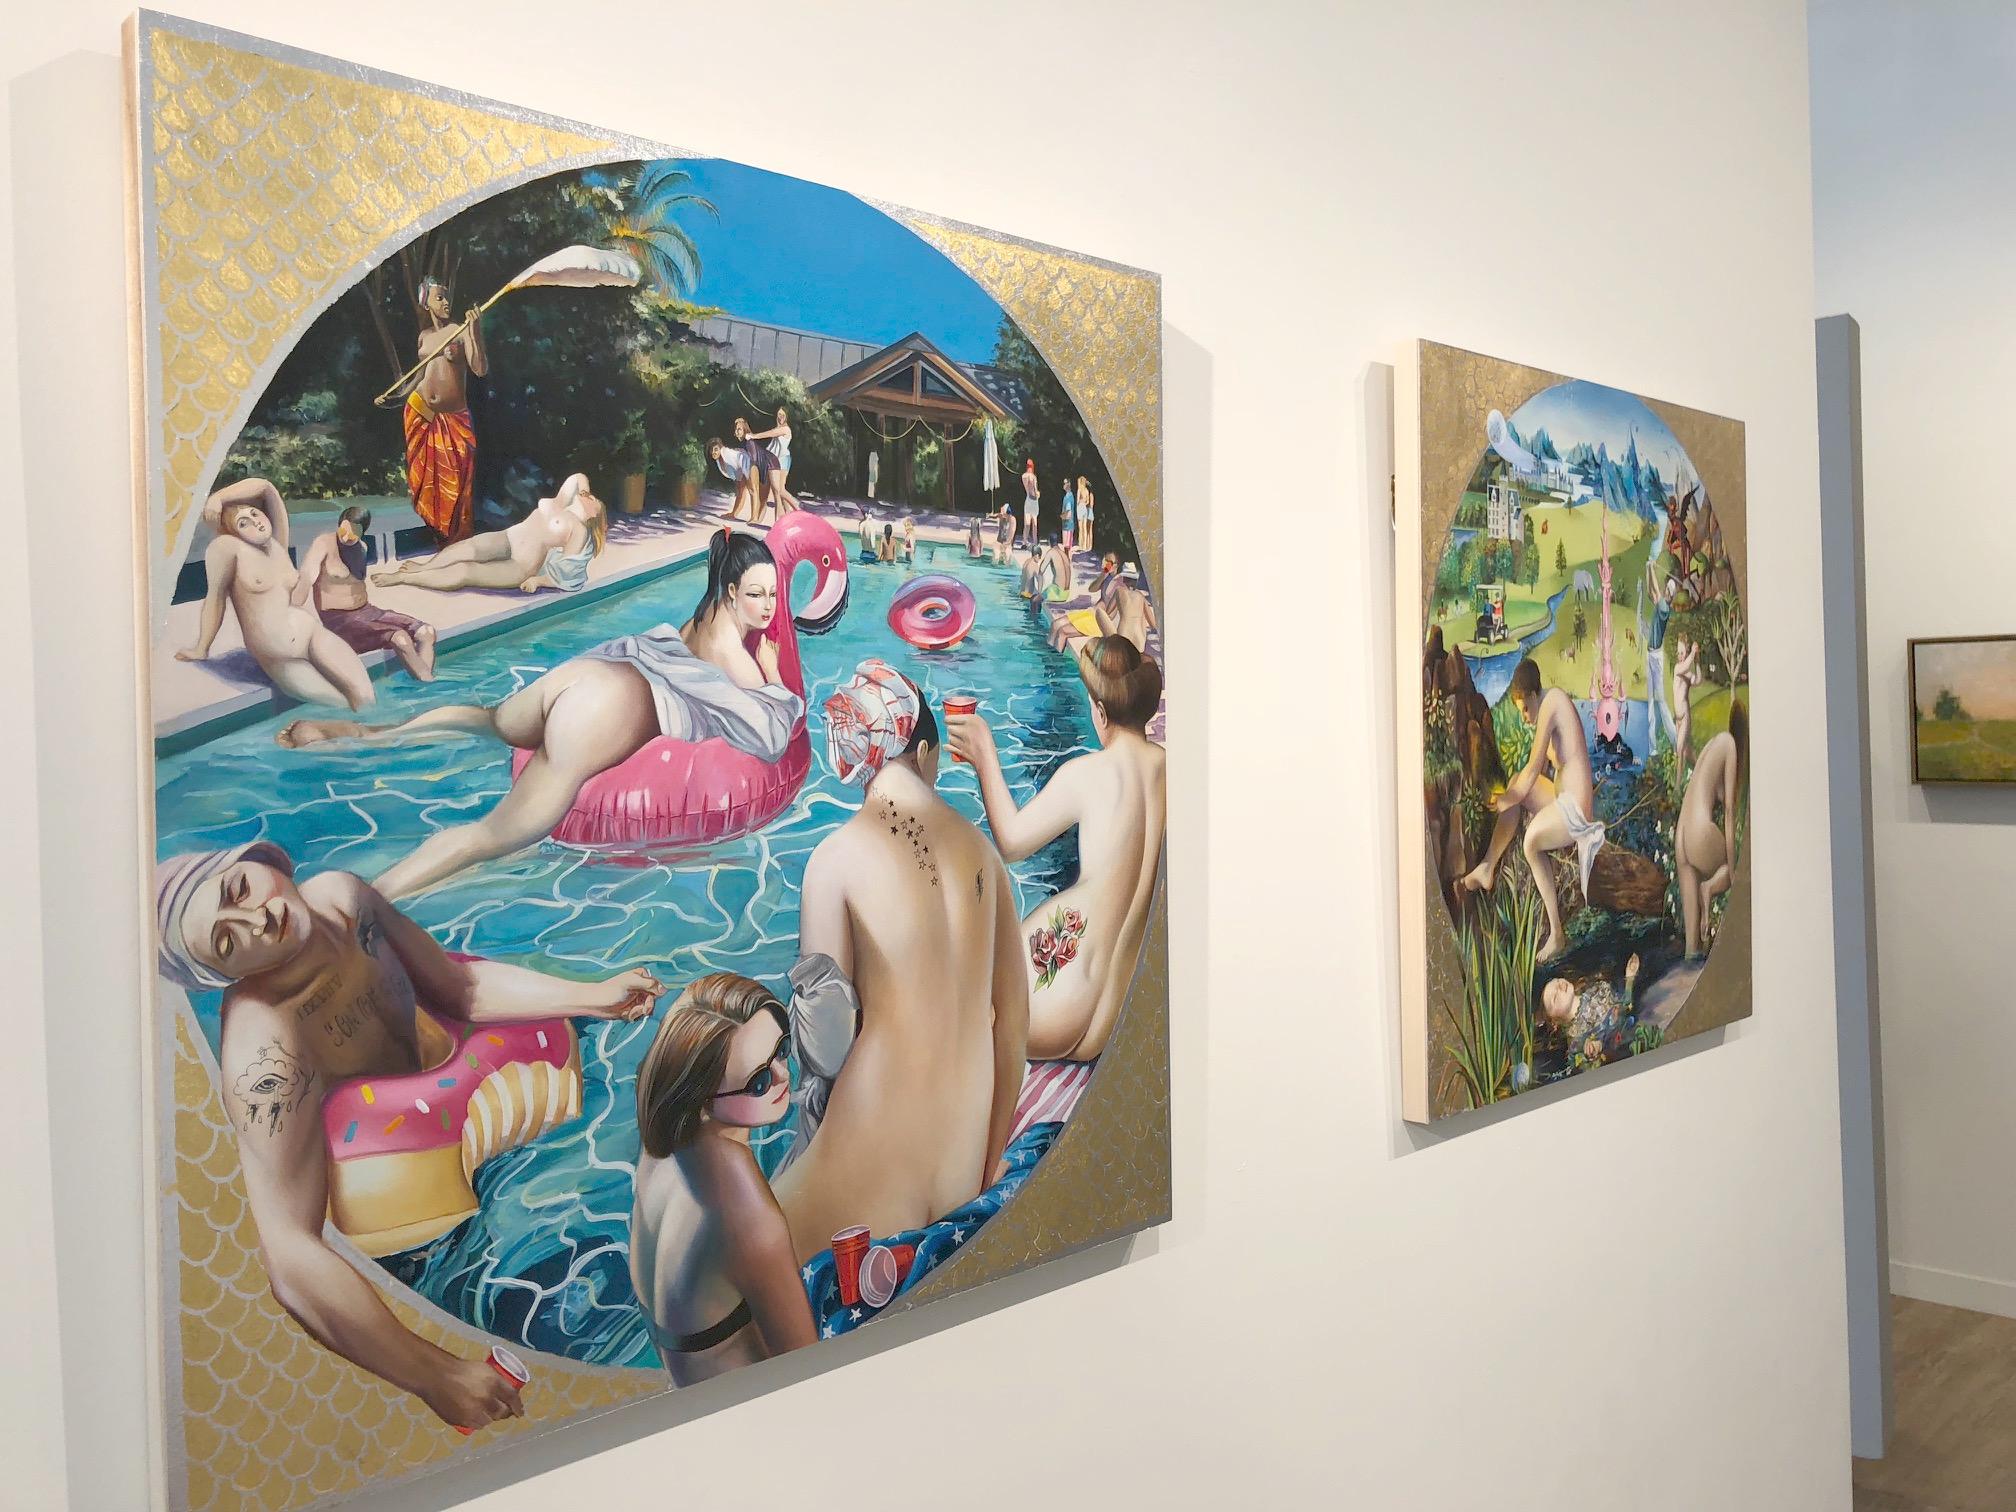 'Fountain of Youth' figurative scene that considers contemporary times and movements including Me-Too and Feminism. Scene from a hi-tech pool party that also art history and classicism, from rising art star Justyna Kisielewicz, whose elaborate oil